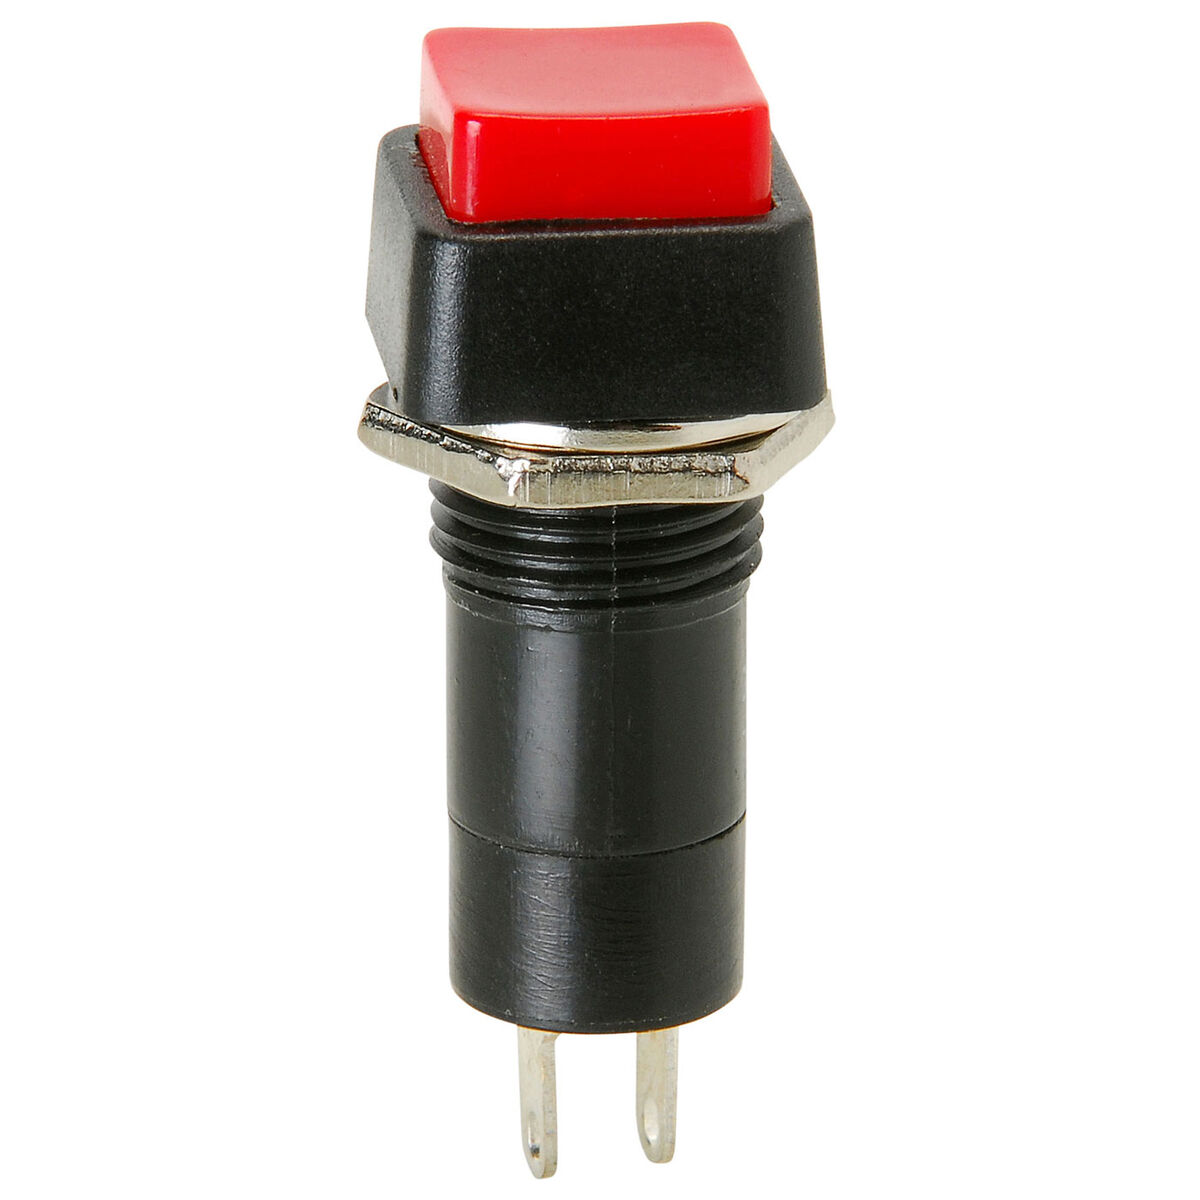 SPST N/O MOMENTARY ON BLK PLUNGER PUSH BUTTON SWITCH 3AMP@125VAC #66-2475-1PK 